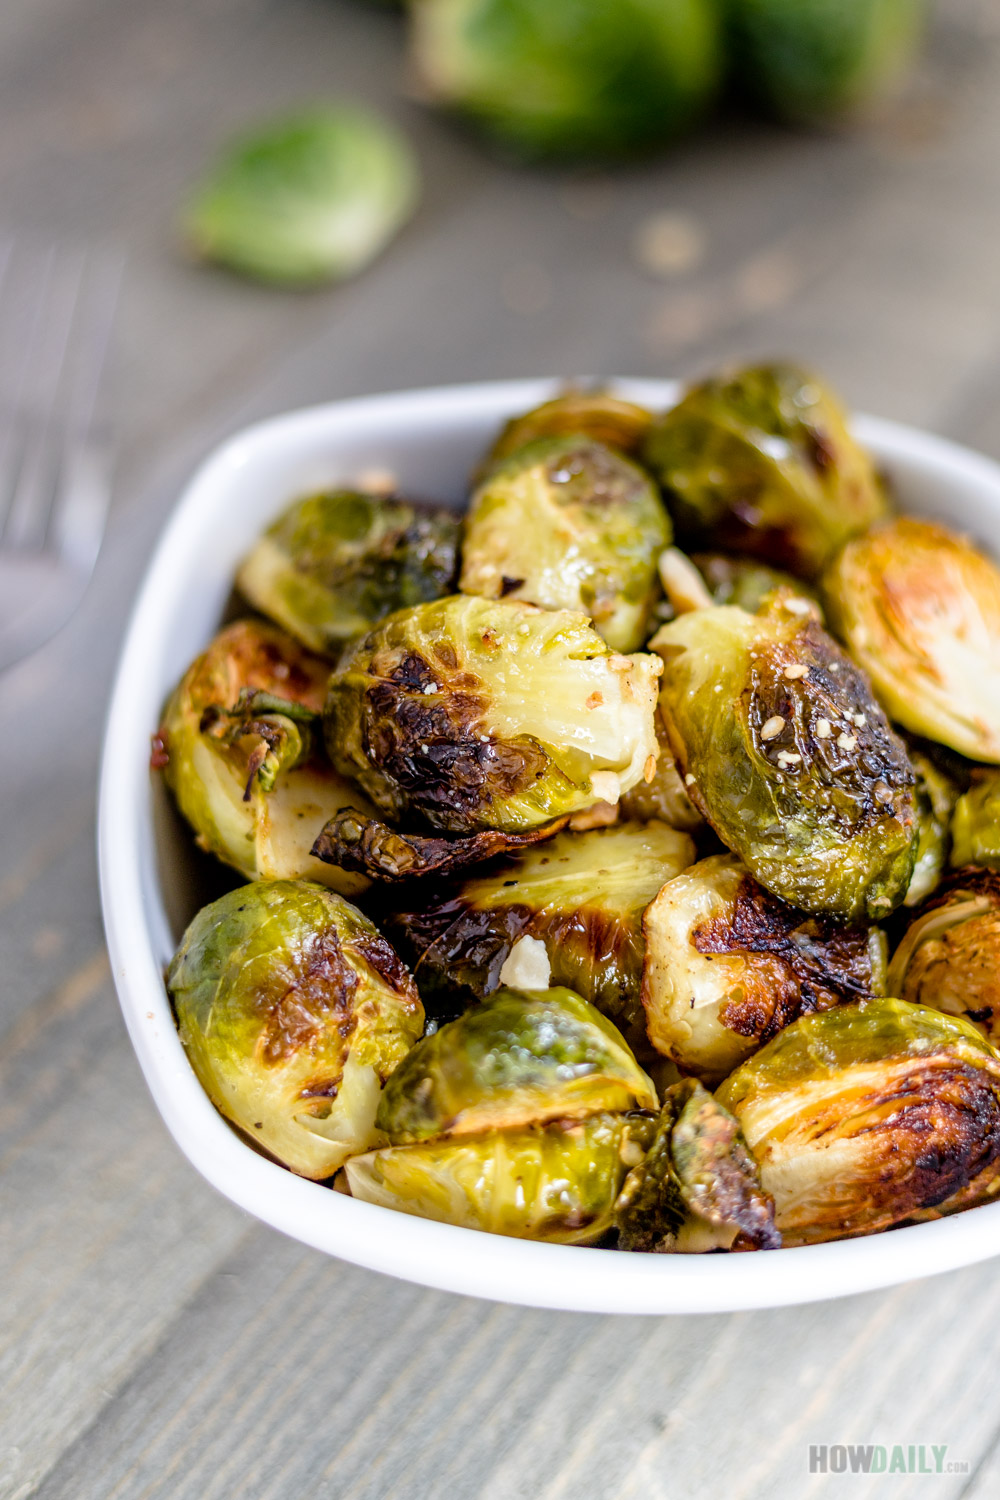 Vegan Roasted Brussels Sprouts Recipe with Garlic and Lemon